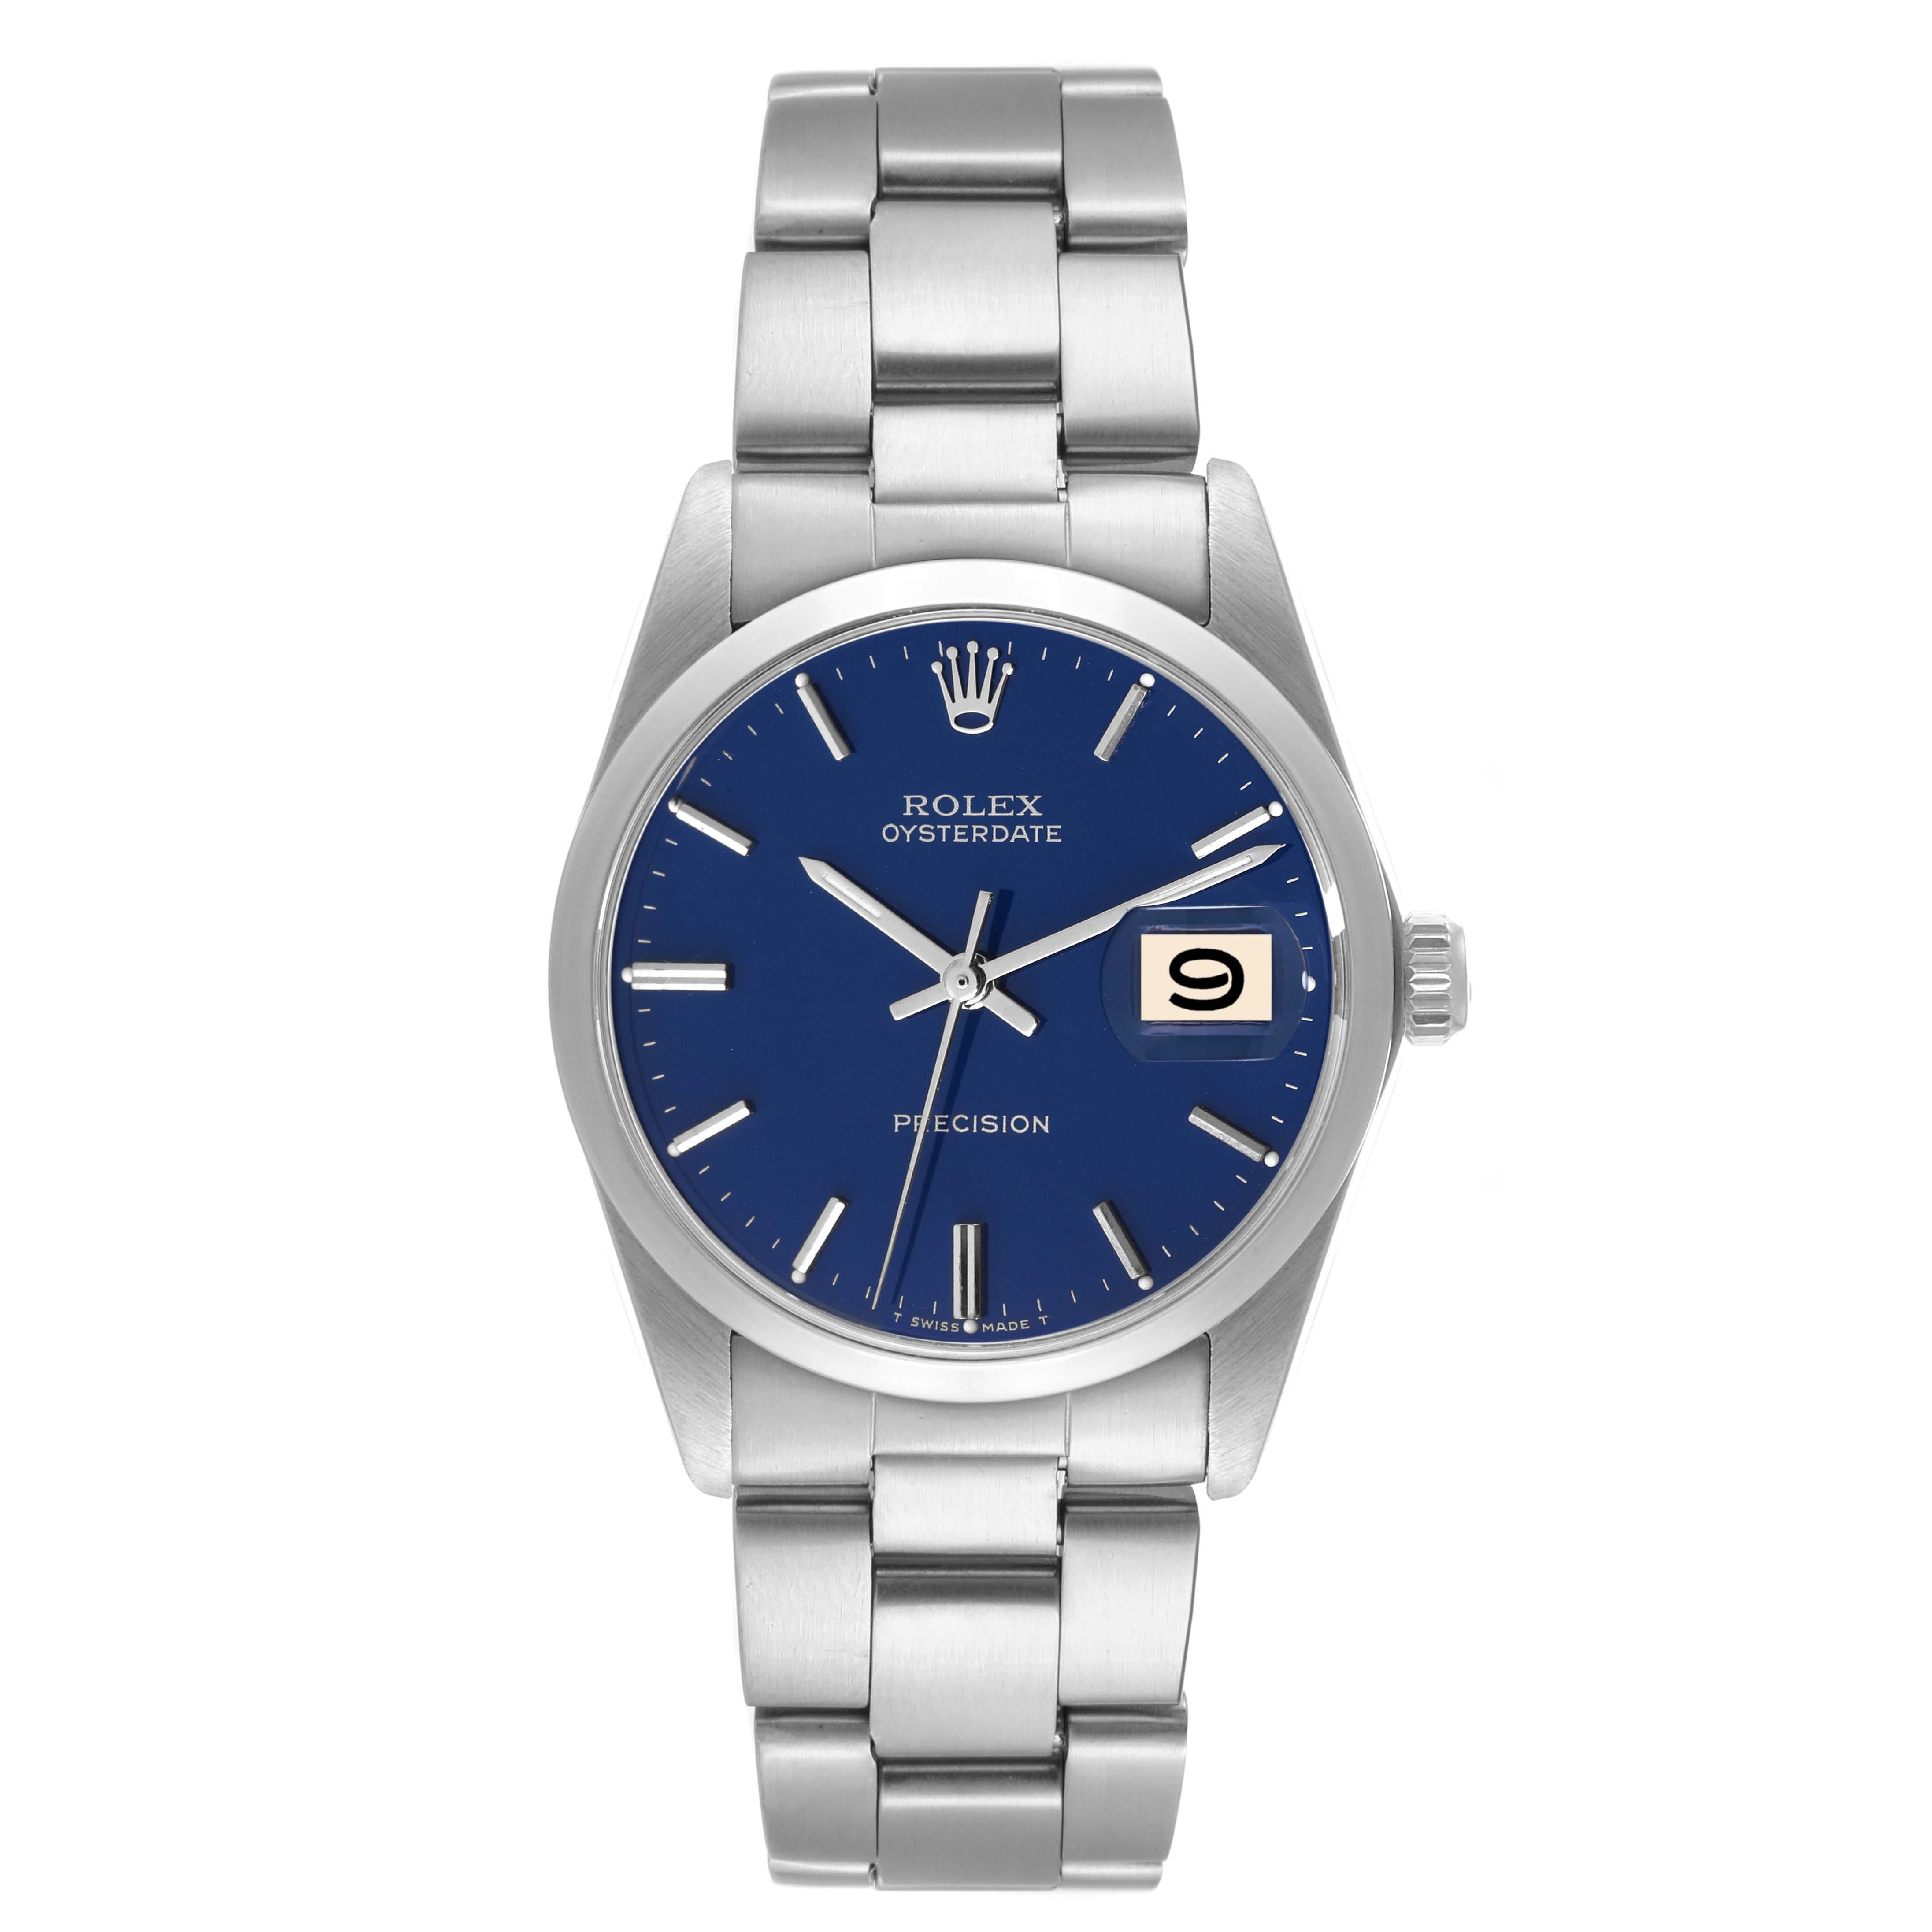 Rolex OysterDate Precision Blue Dial Steel Vintage Mens Watch 6694. Manual-winding movement. Stainless steel oyster case 35.0 mm in diameter. Rolex logo on the crown. Stainless steel smooth bezel. Acrylic crystal with cyclops magnifier. Blue dial